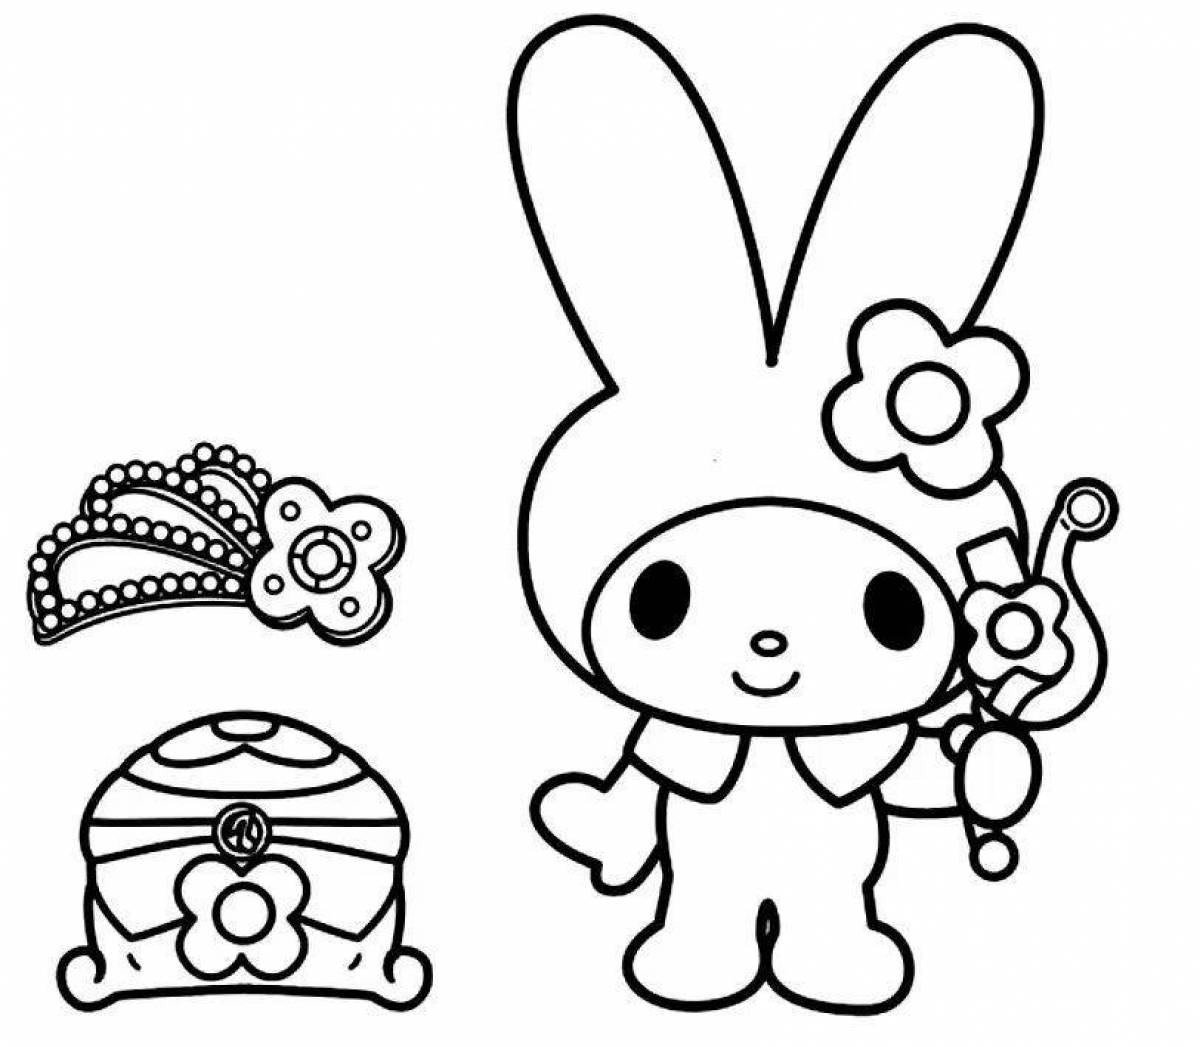 Coloring page wild my melody